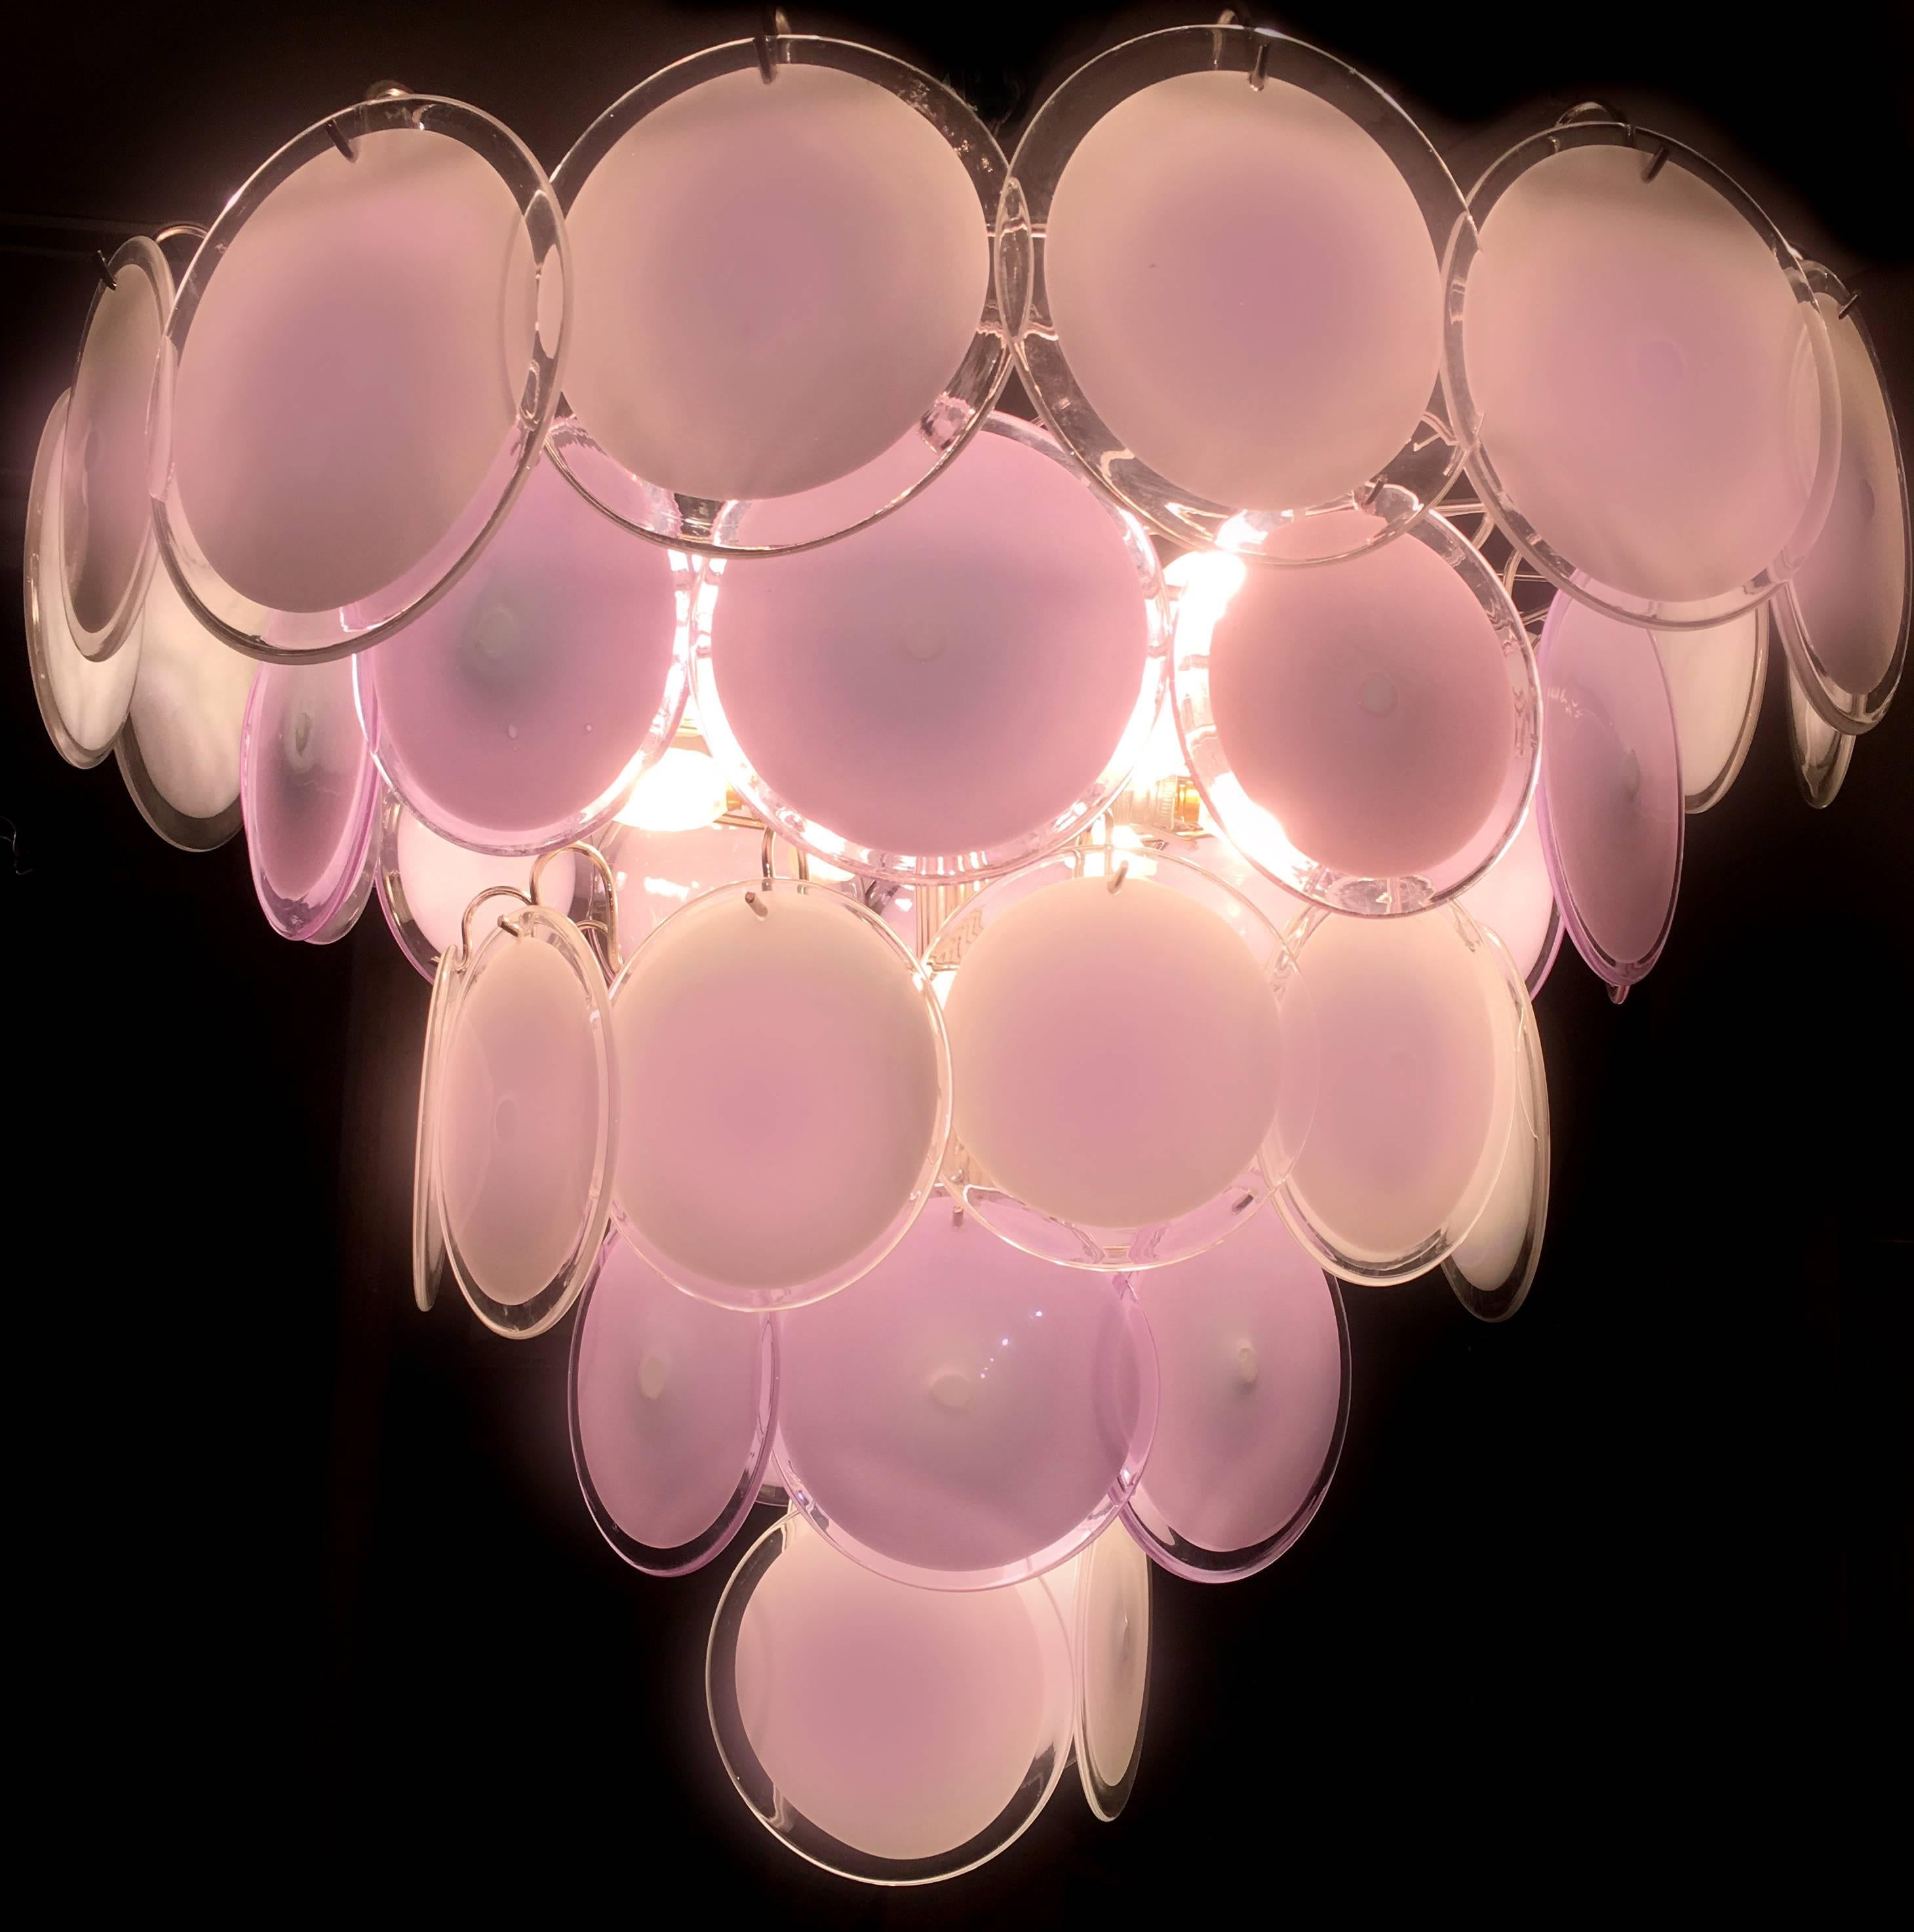 Spectacular chandelier by Vistosi made with 50 pink Murano discs.
16 E 14 light bulbs. We can wire for your country standards.
Available also a pair of small 24 disc chandelier and four pairs of sconces.